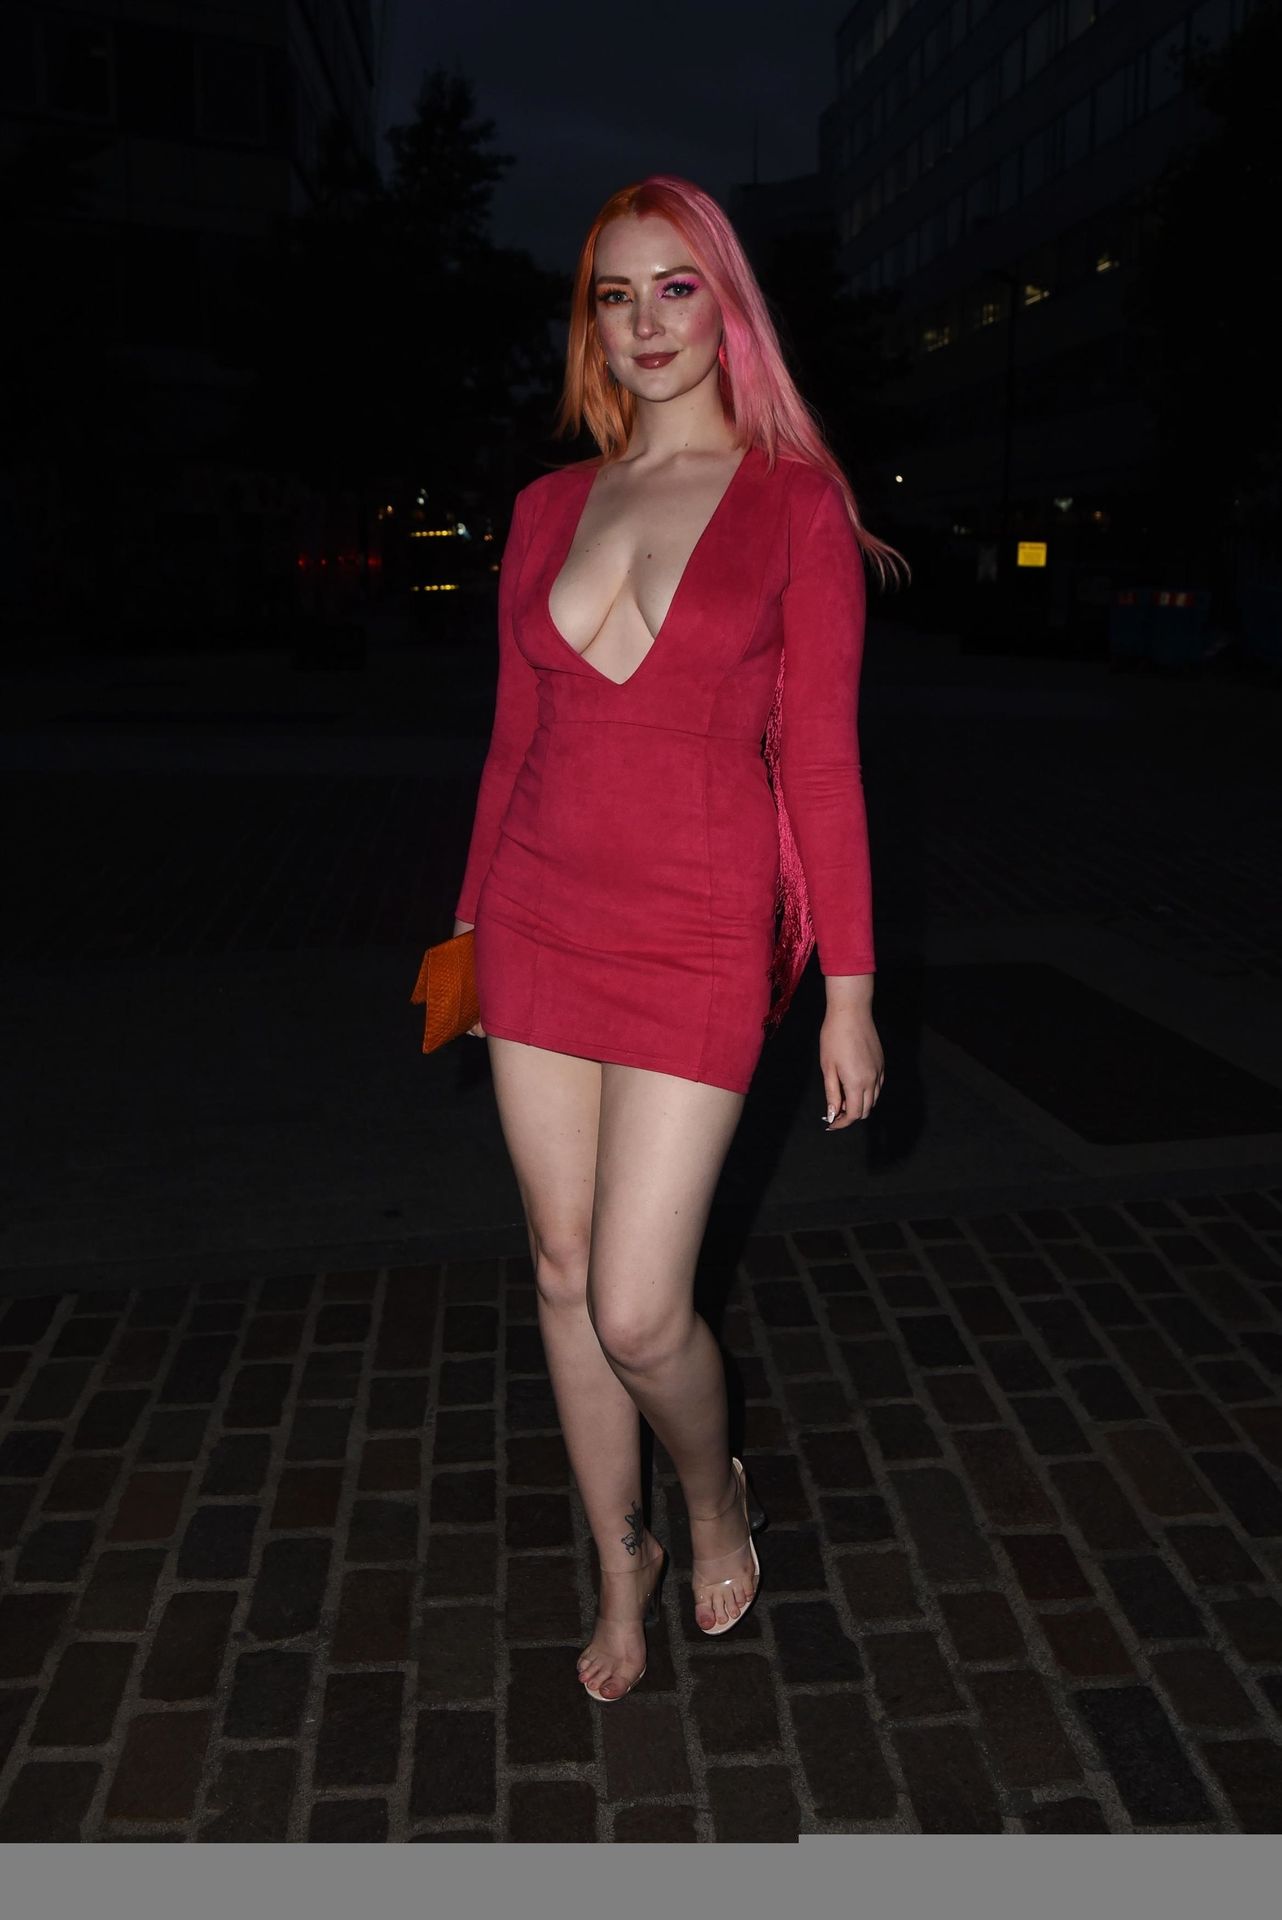 Victoria Clay Shows Off Her Tits at The Old Street Gallery (20 Photos)